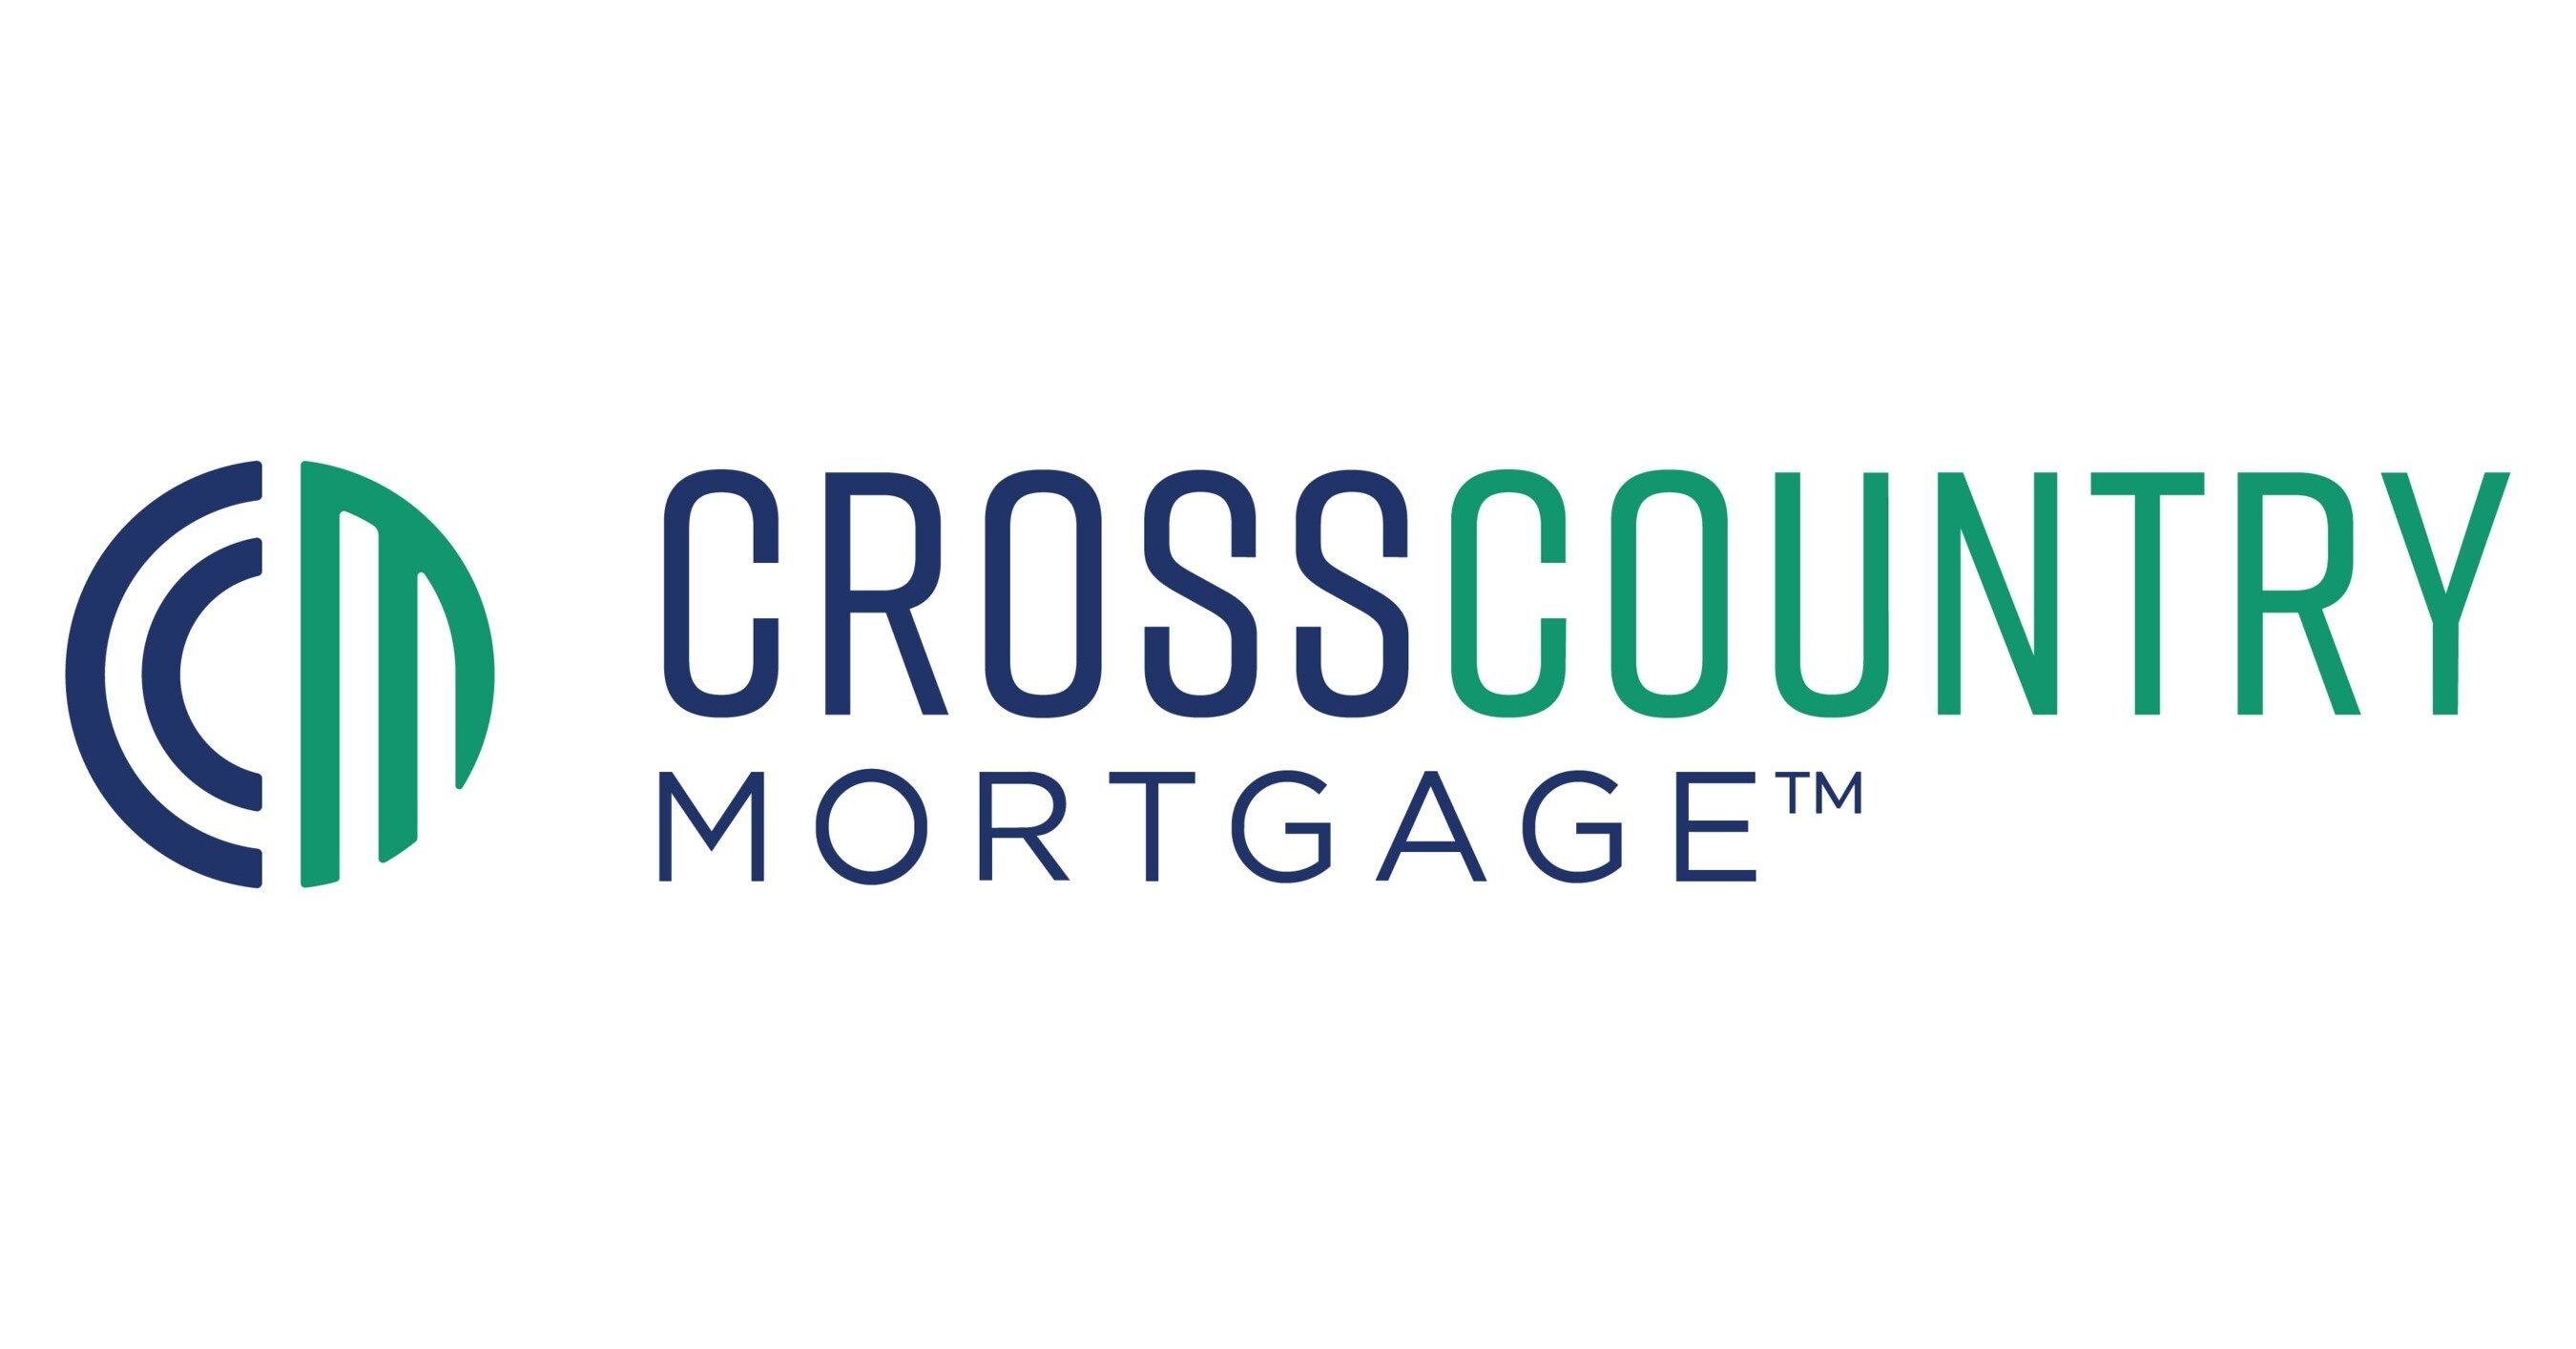 CrossCountry Mortgage